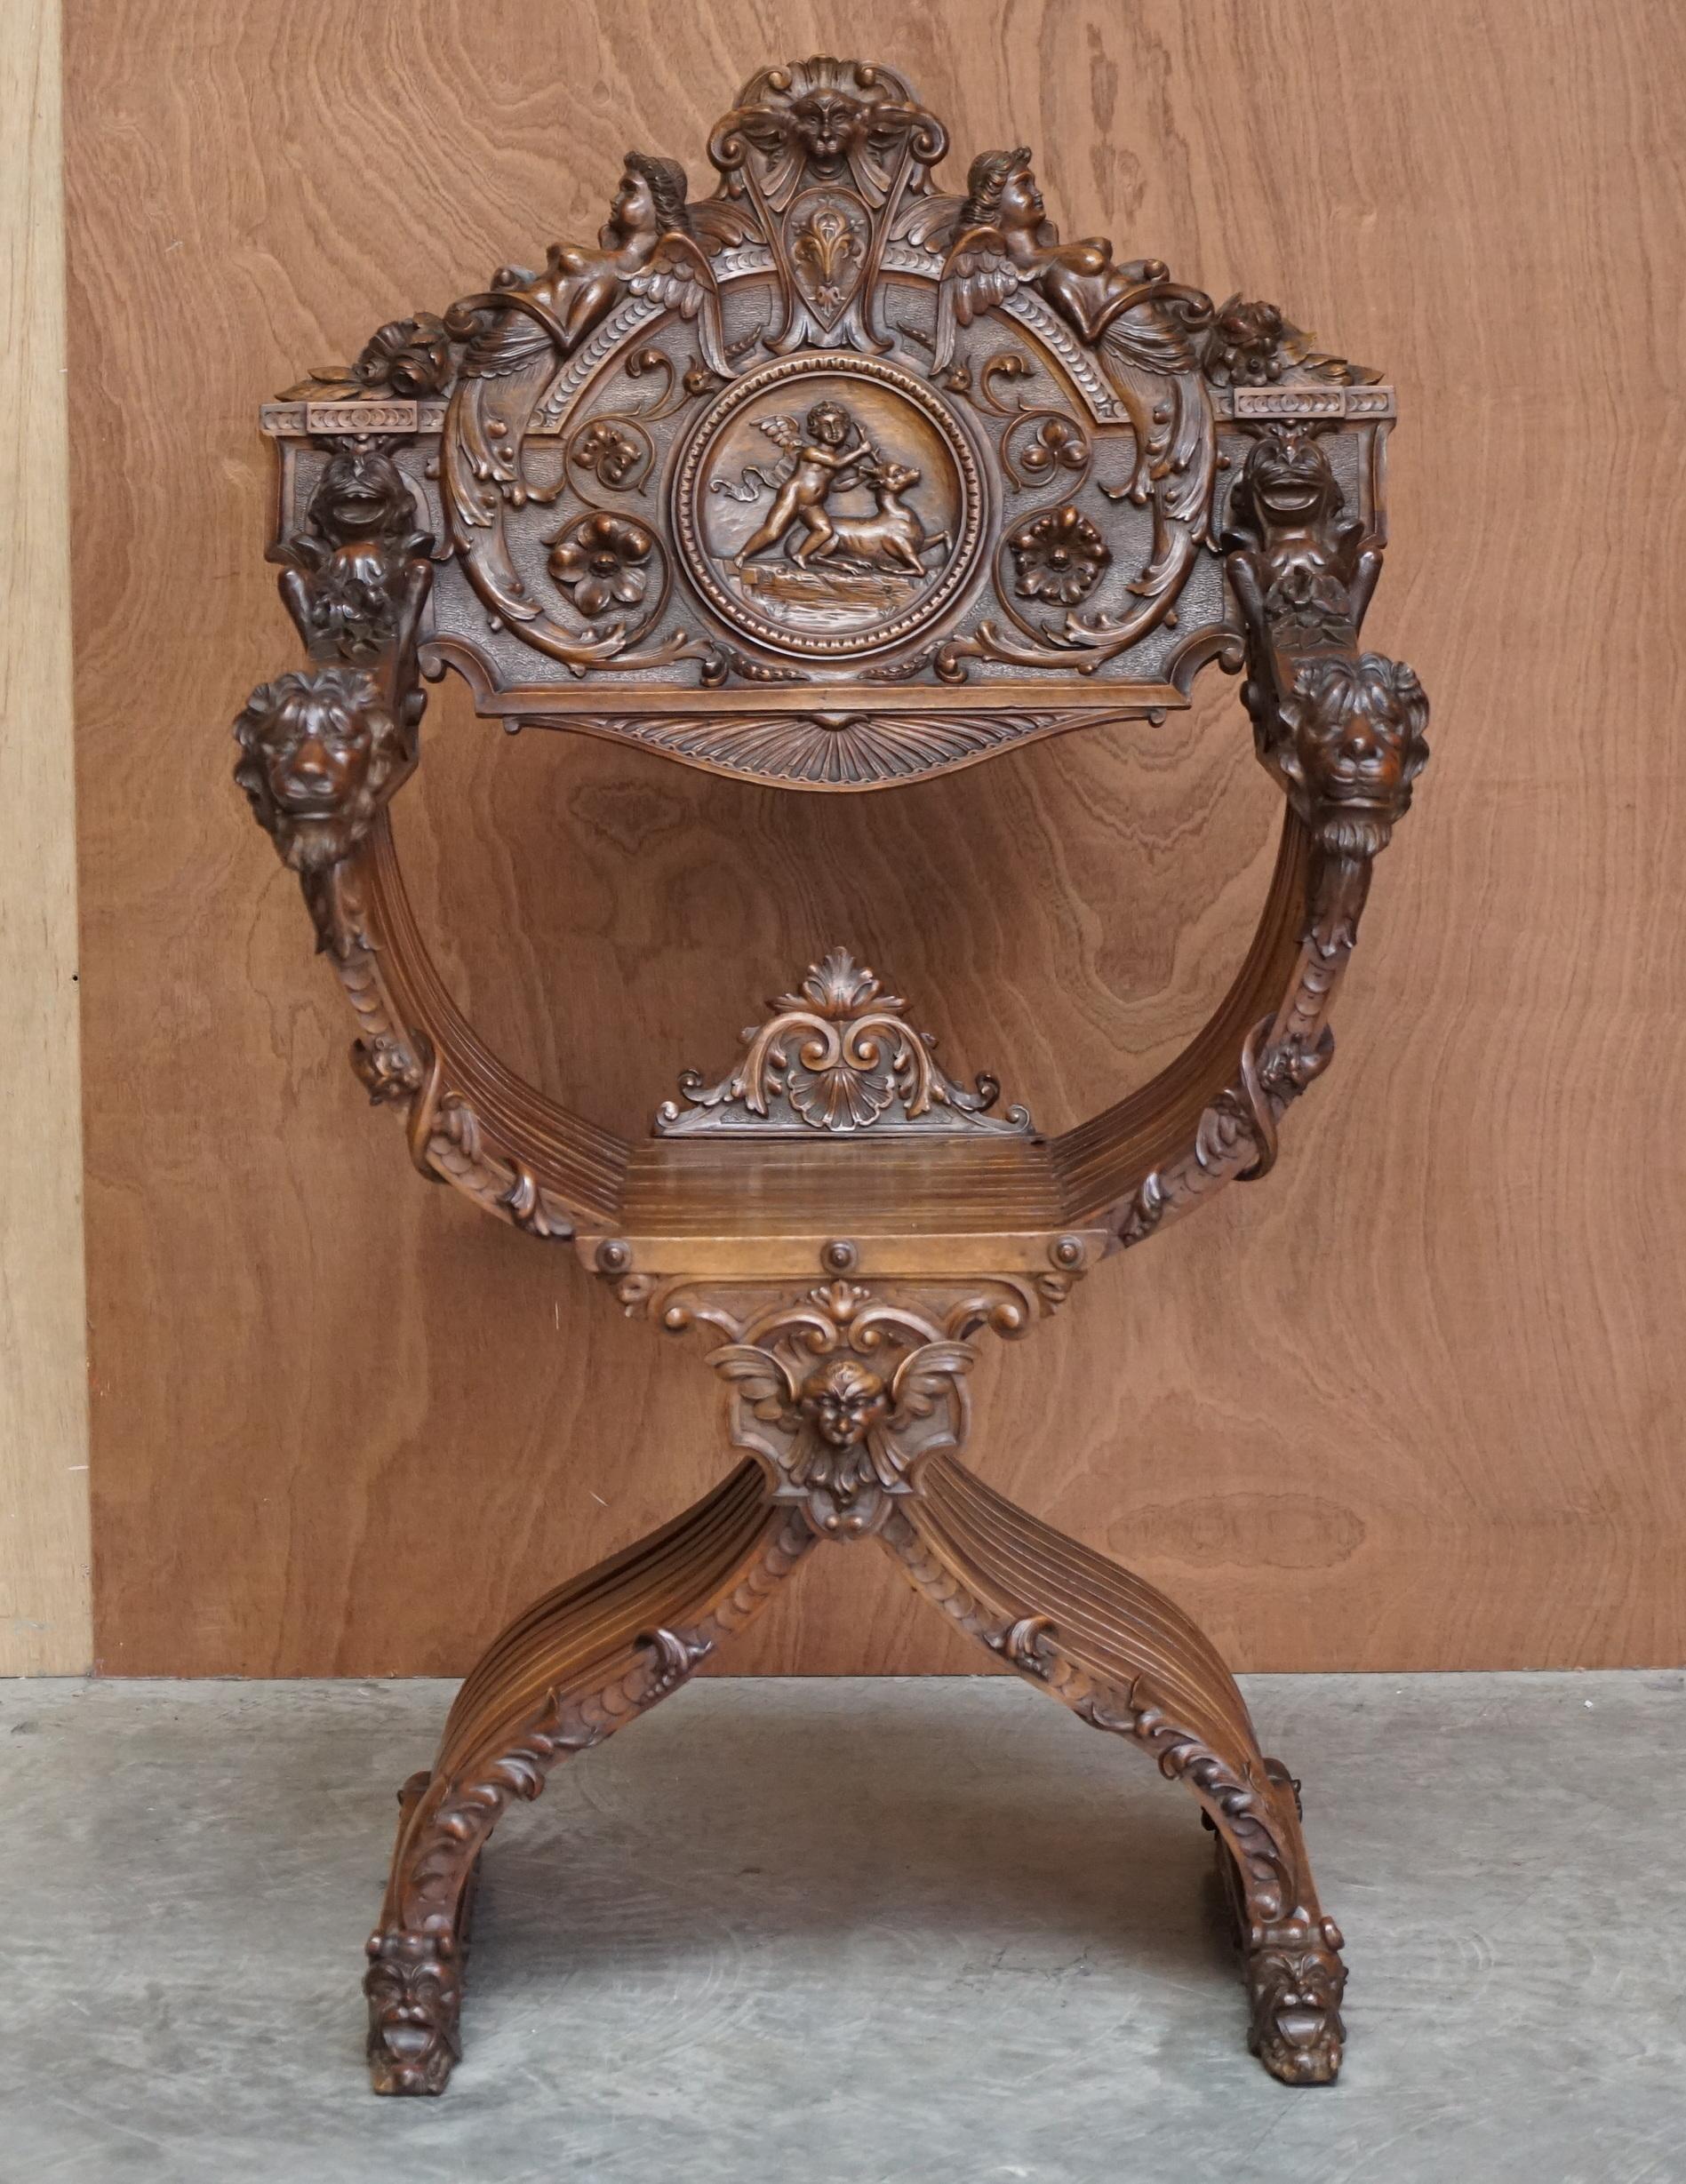 We are delighted to offer for sale this lovely 19th century Antique Italian Renaissance Revival hand carved walnut Savonarola folding armchair

This is truly a stunning chair, its hand carved from top to bottom and every piece tells a story. This